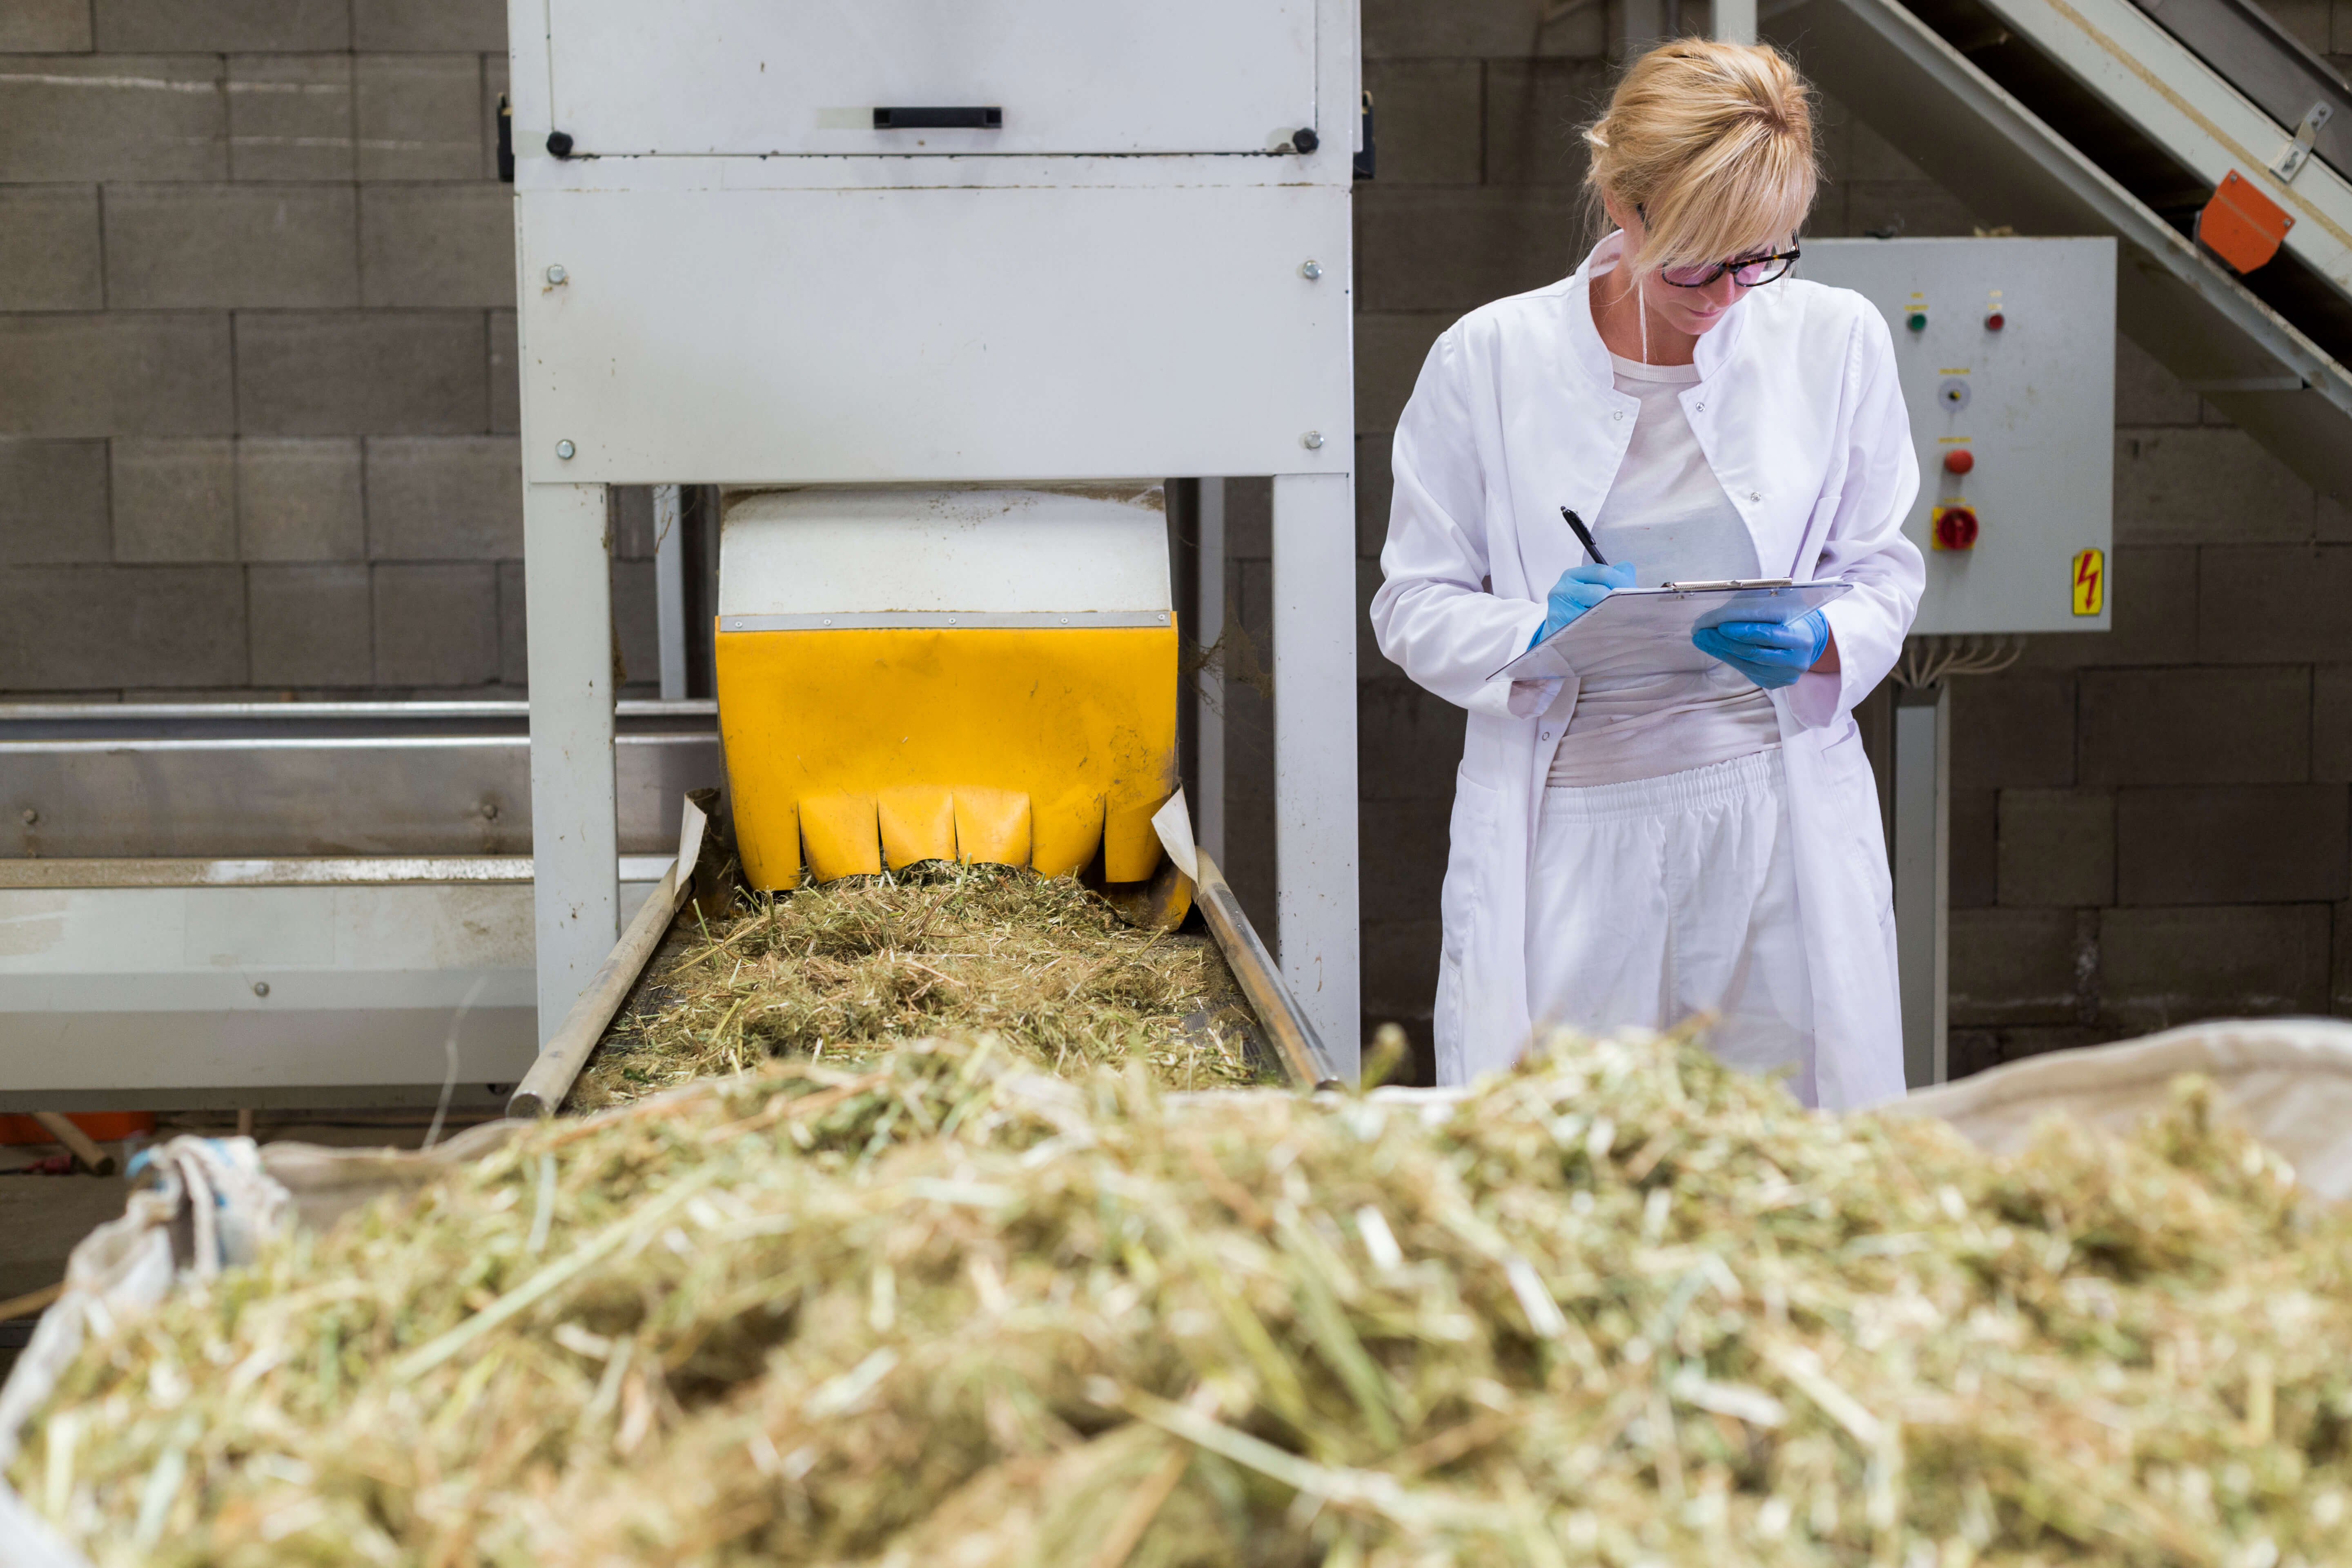 Free Guide: Why Compliance Regulations Are A Pathway to Safety and Growth in Cannabis Cultivation